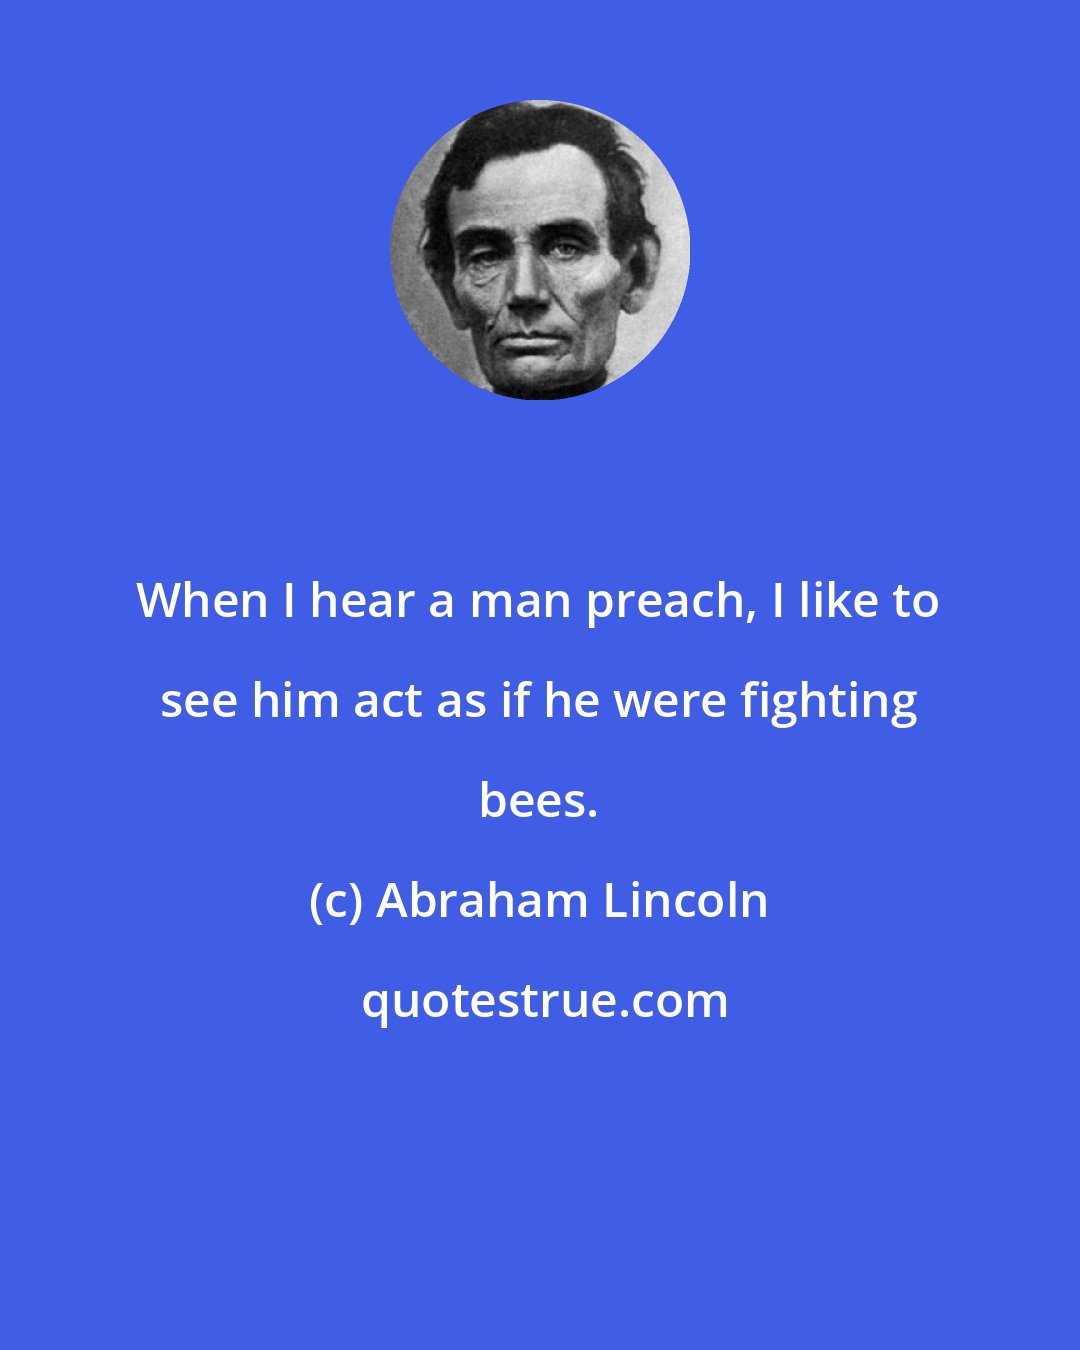 Abraham Lincoln: When I hear a man preach, I like to see him act as if he were fighting bees.